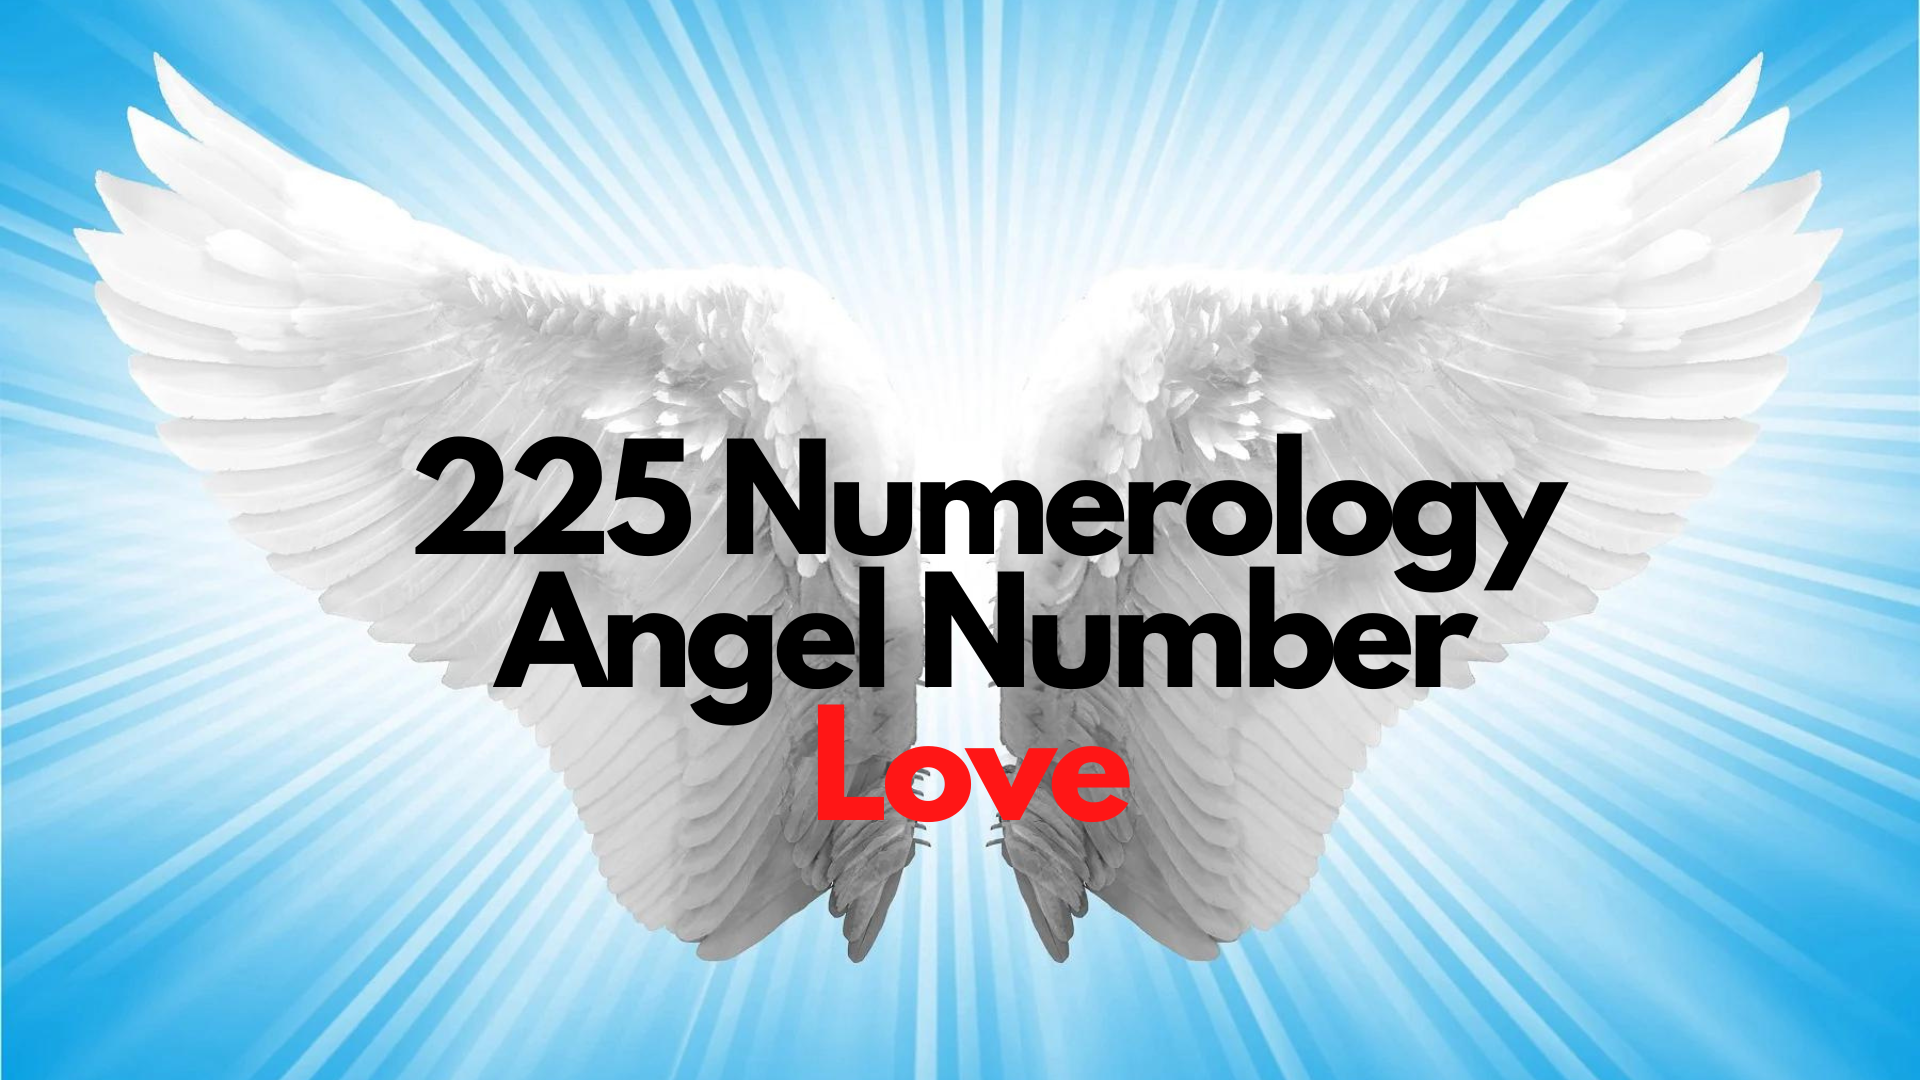 Angel wings with words 225 Numerology Angel Number Love